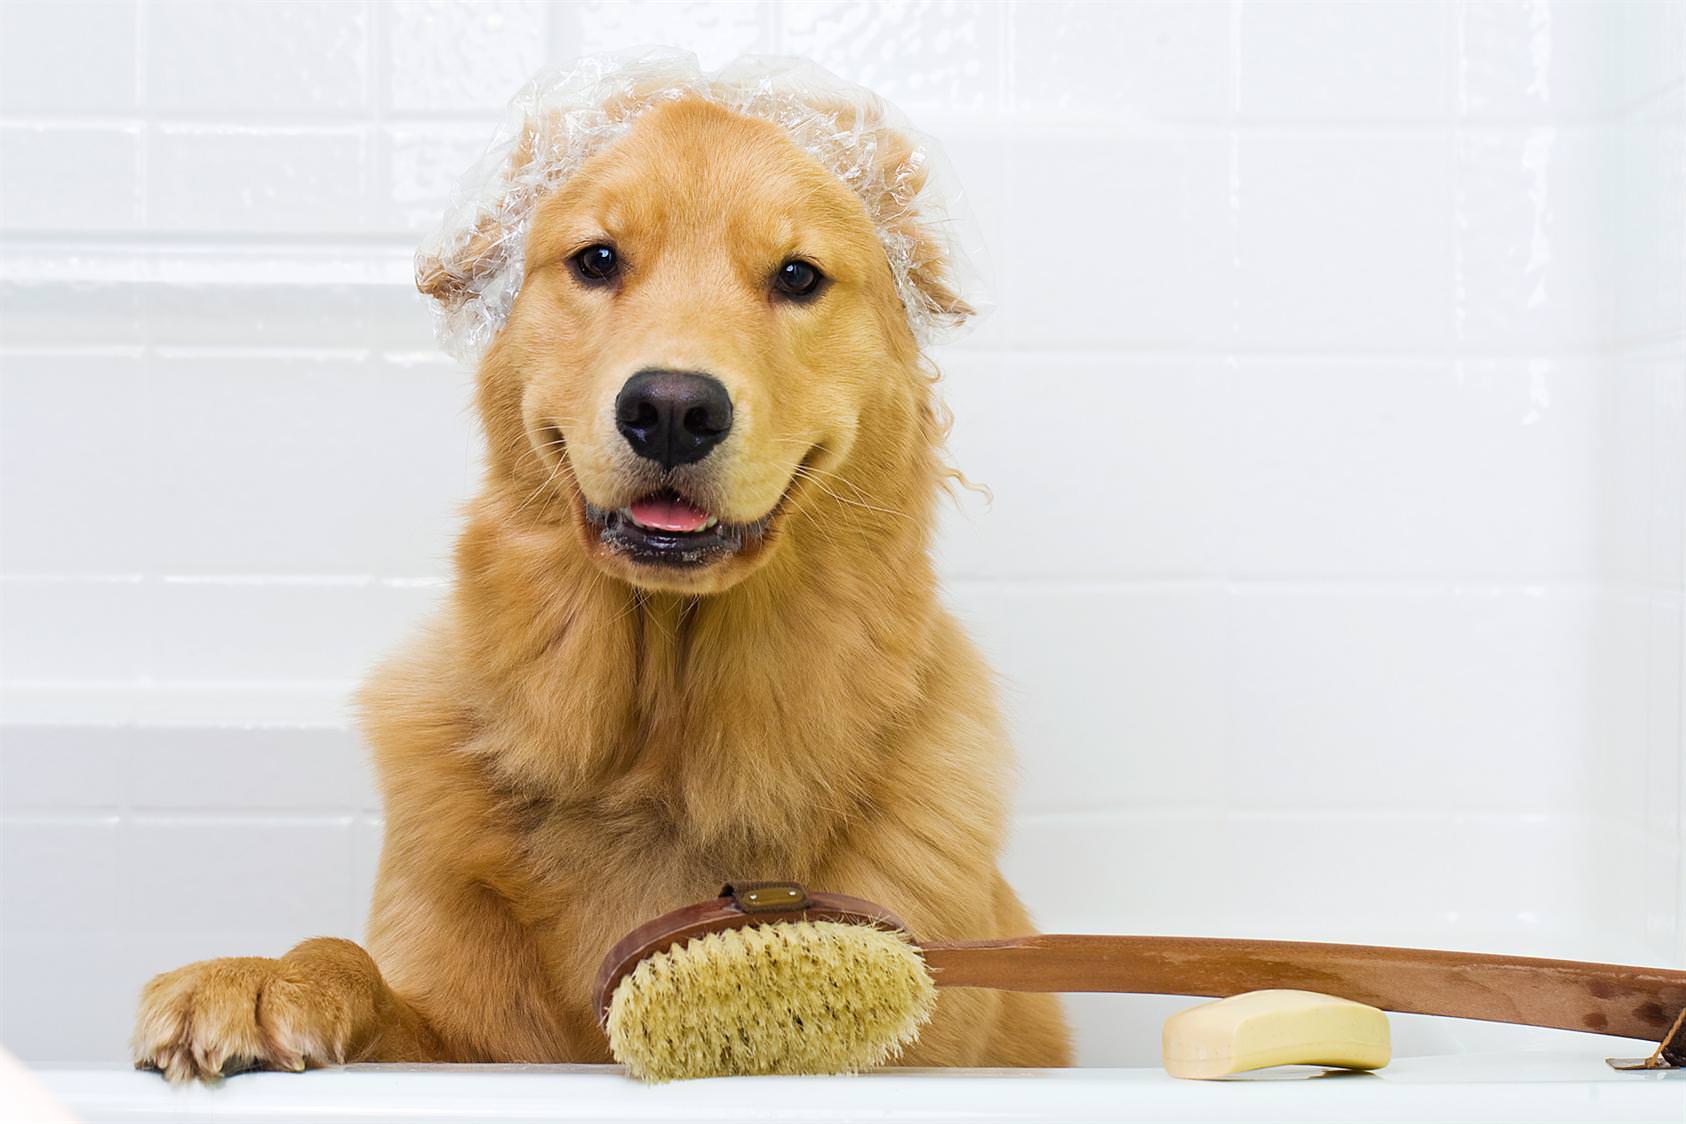 16 Animals Taking a Bath That Will Make Your Day – #10 Couldn’t Get Any Cuter